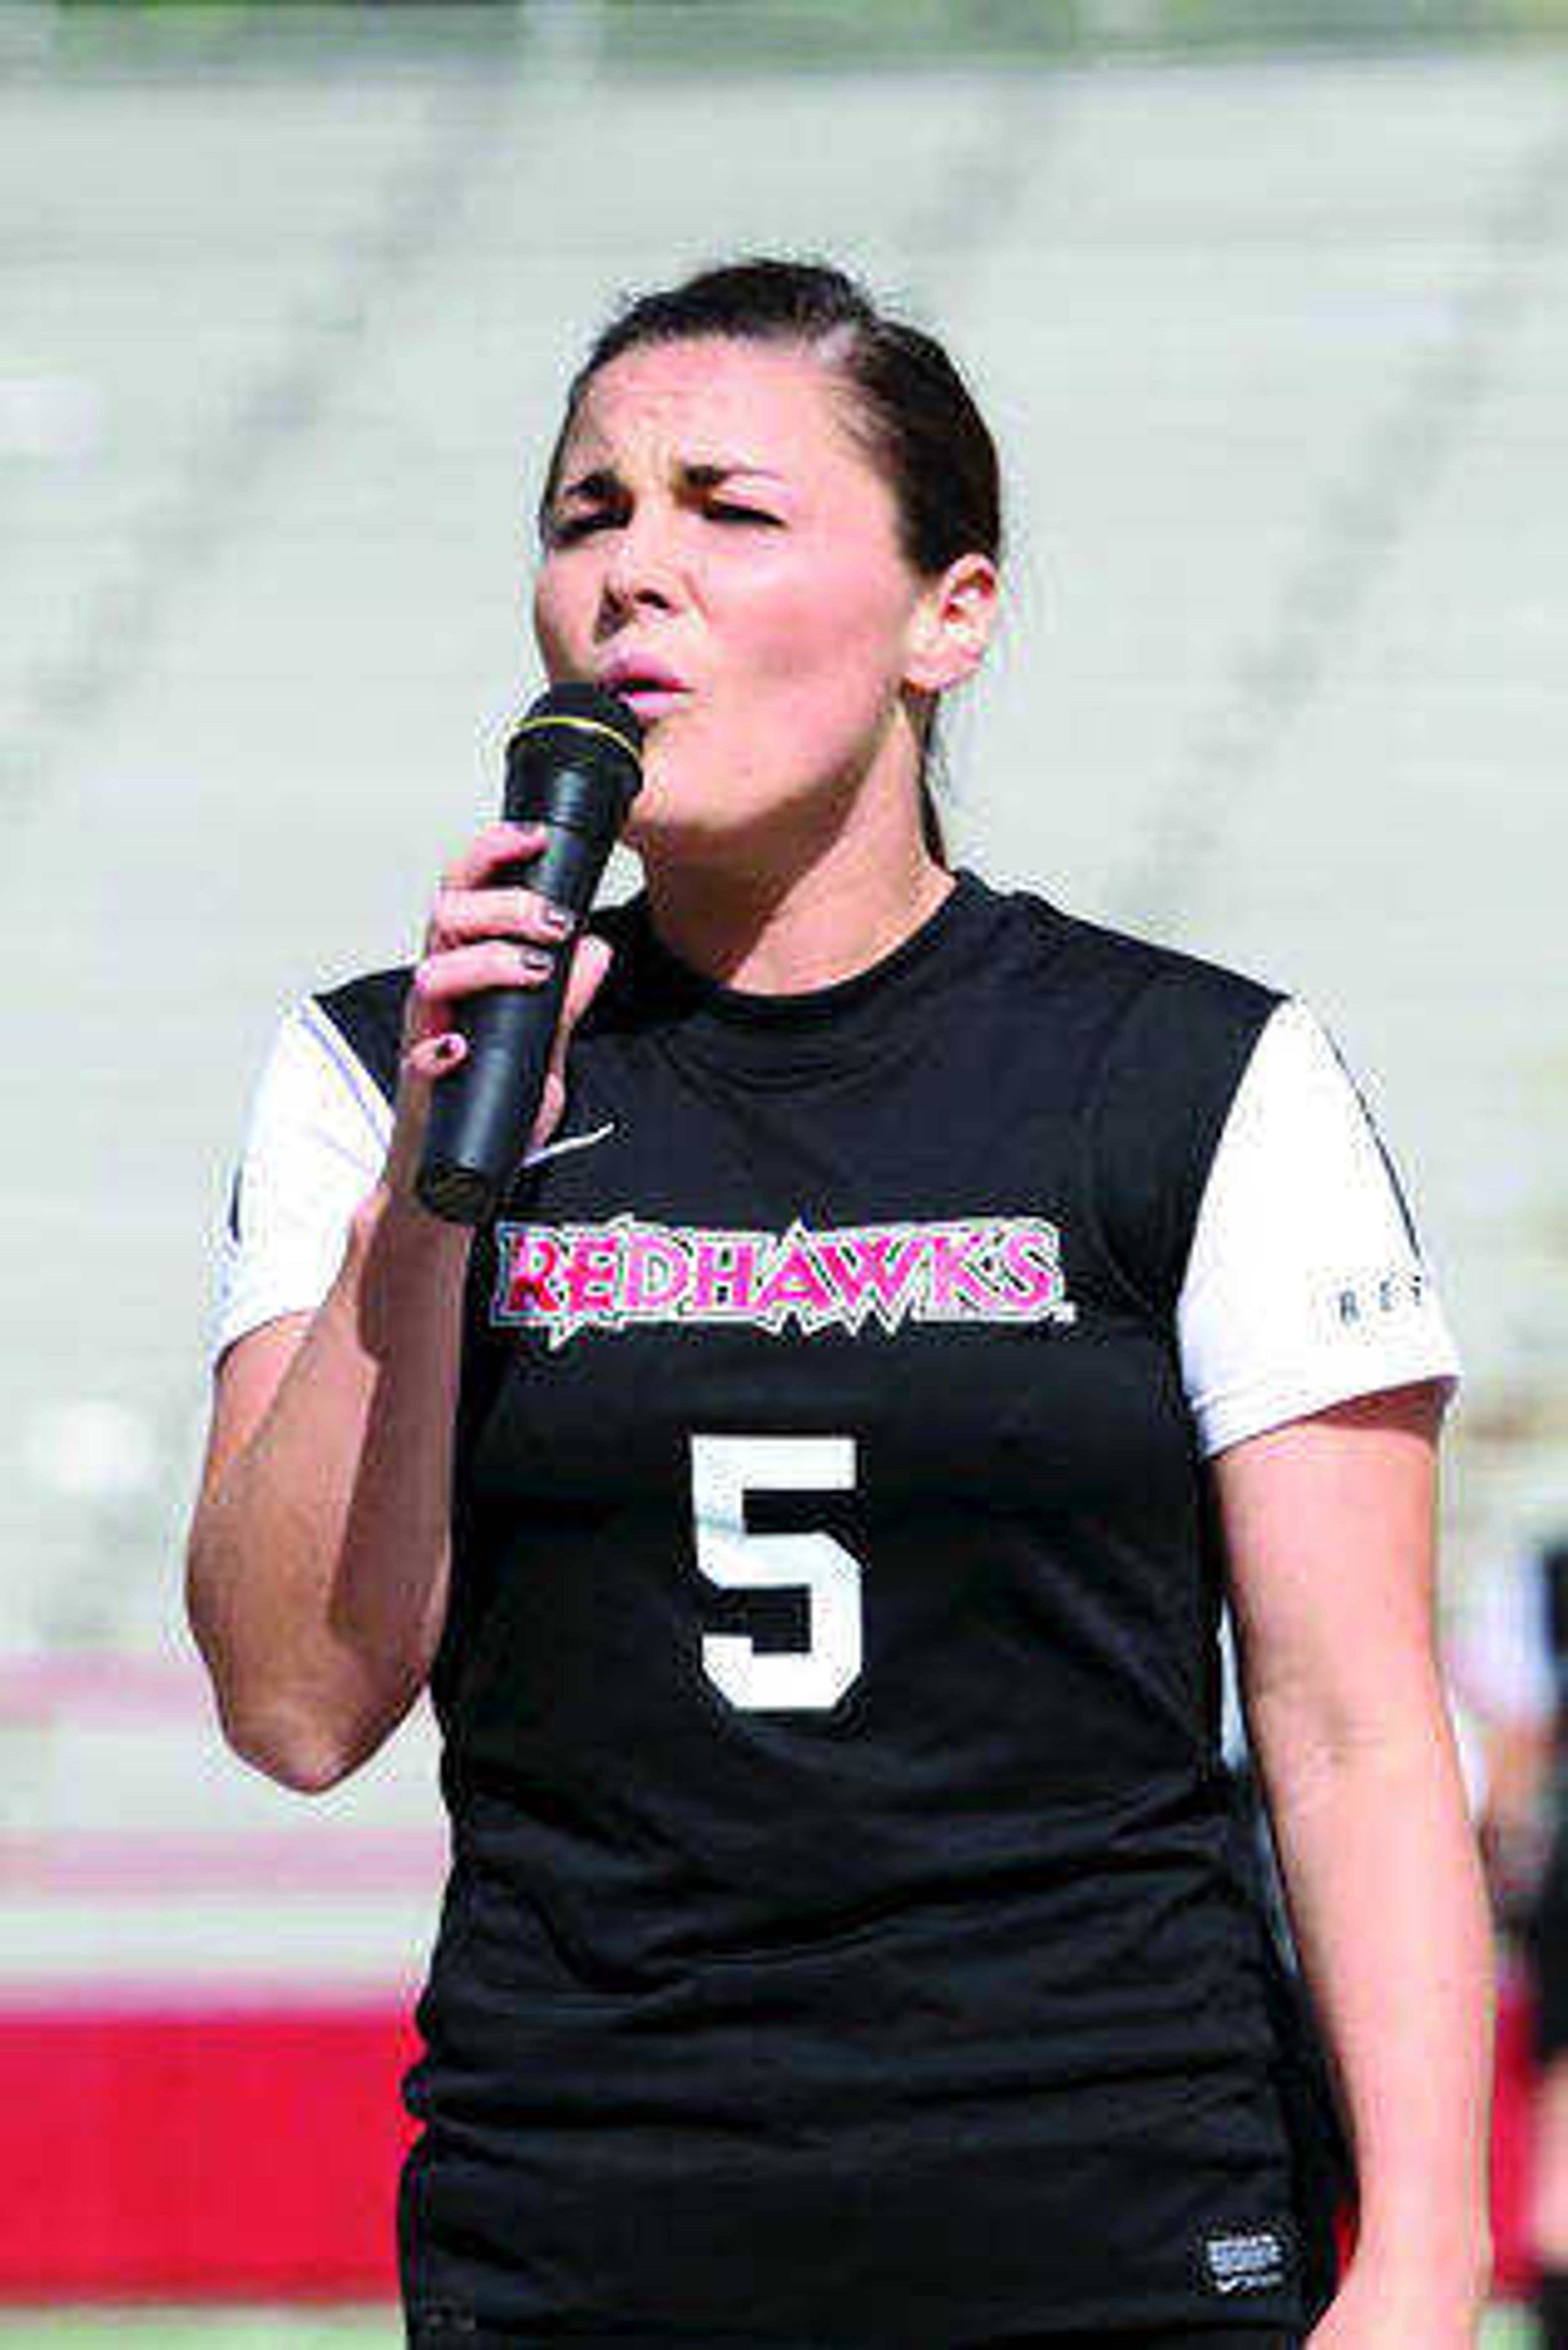 Ellie Hight singing the The Star-Spangled Banner for Senior Day on Oct. 19 at Houck Stadium. Photo by Marc Mahnke/Southeast Missouri Sports Information